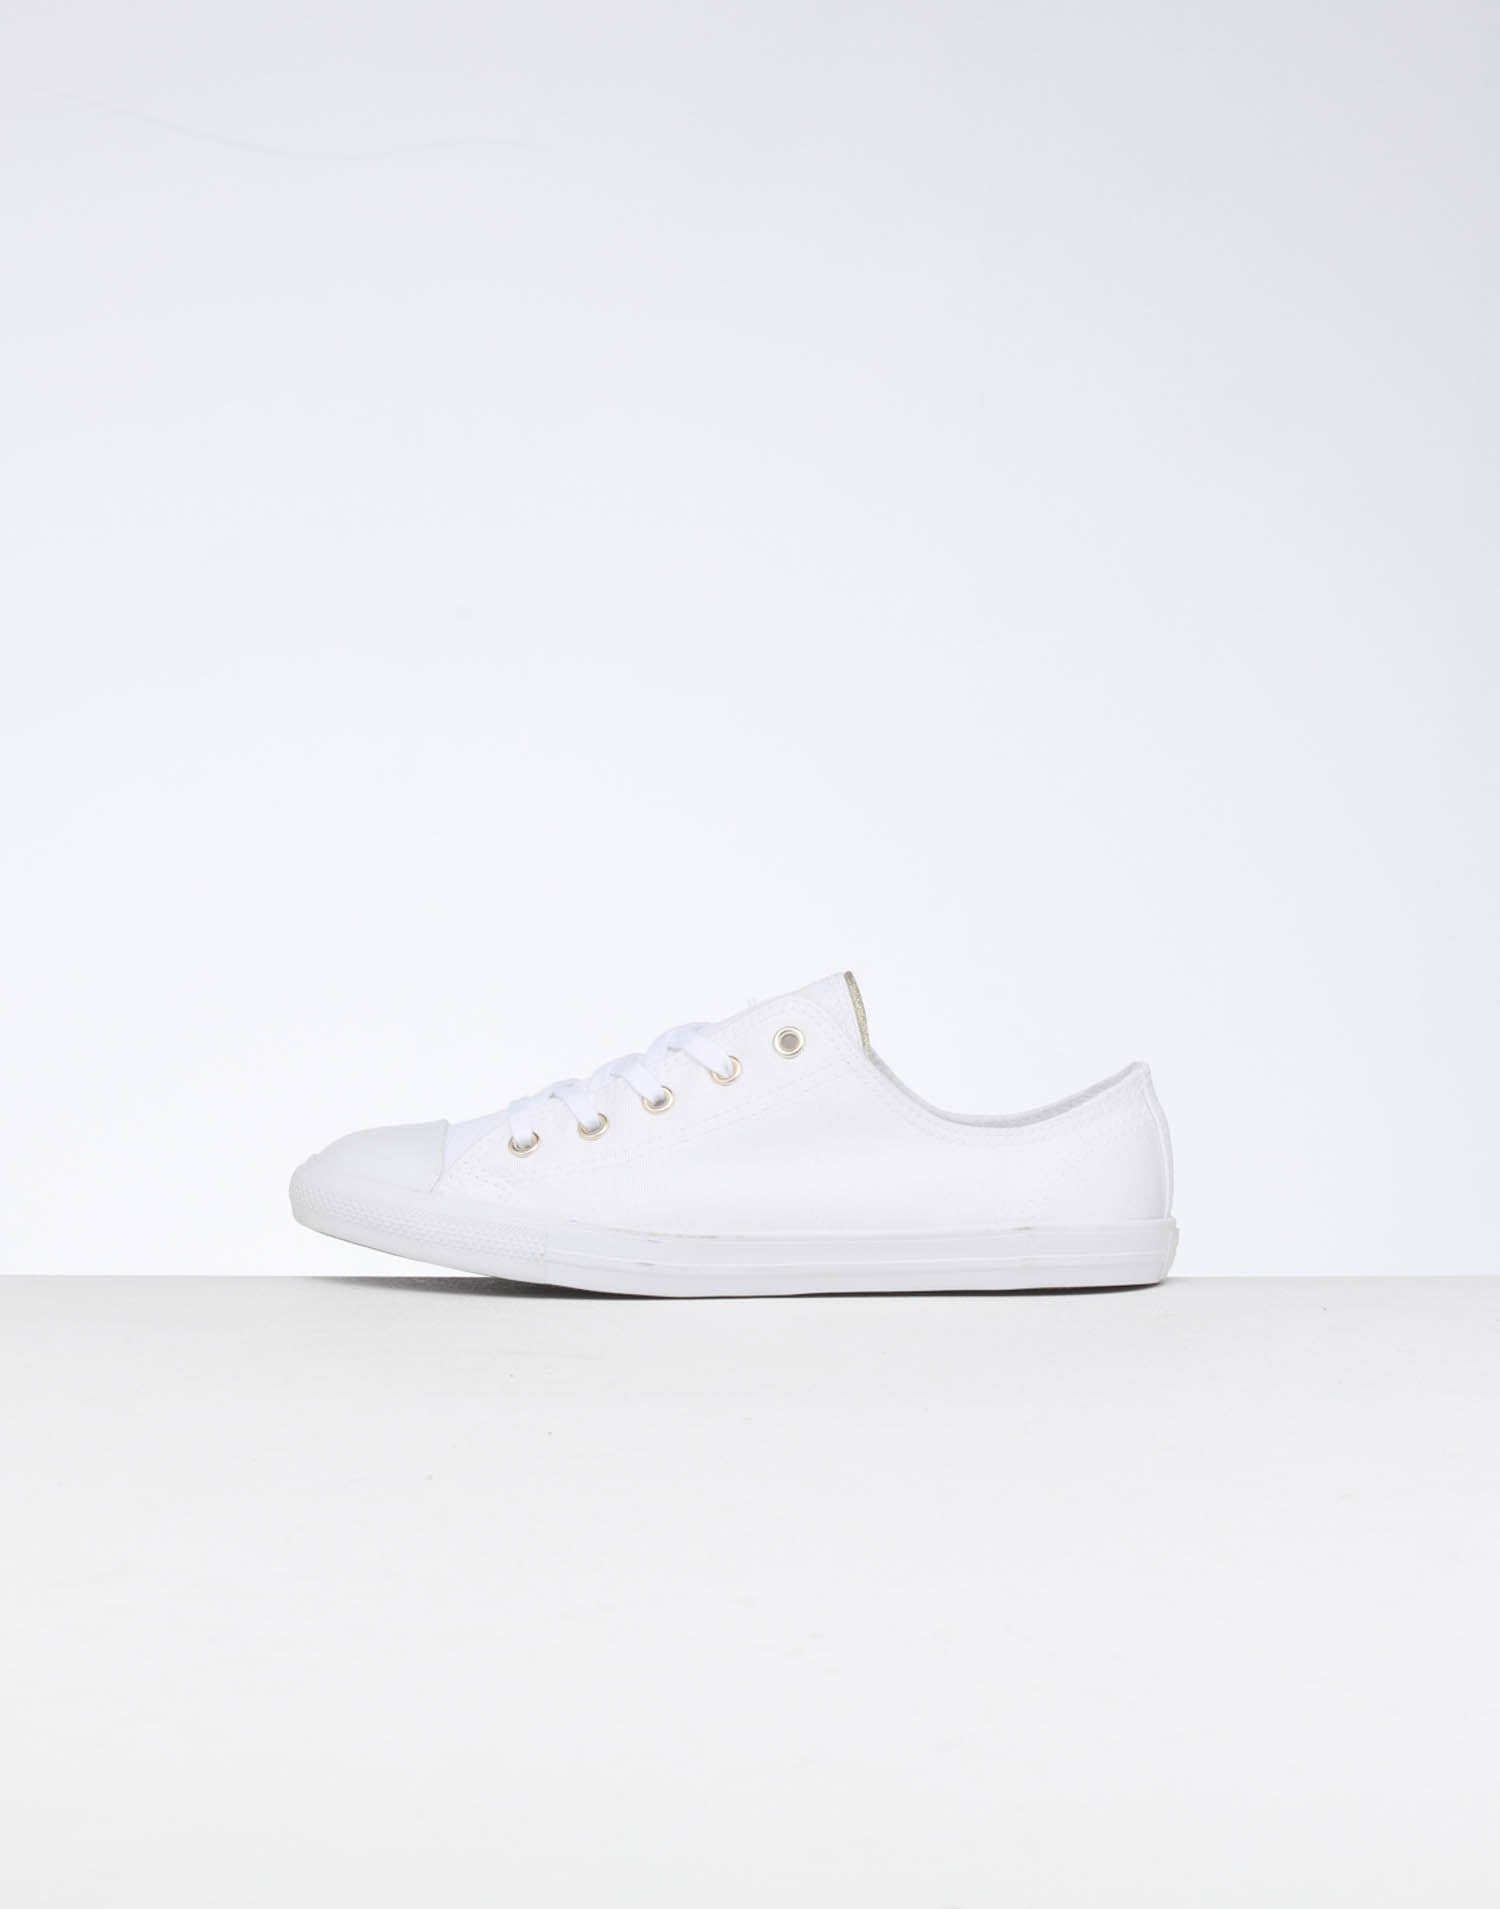 converse ct as dainty white